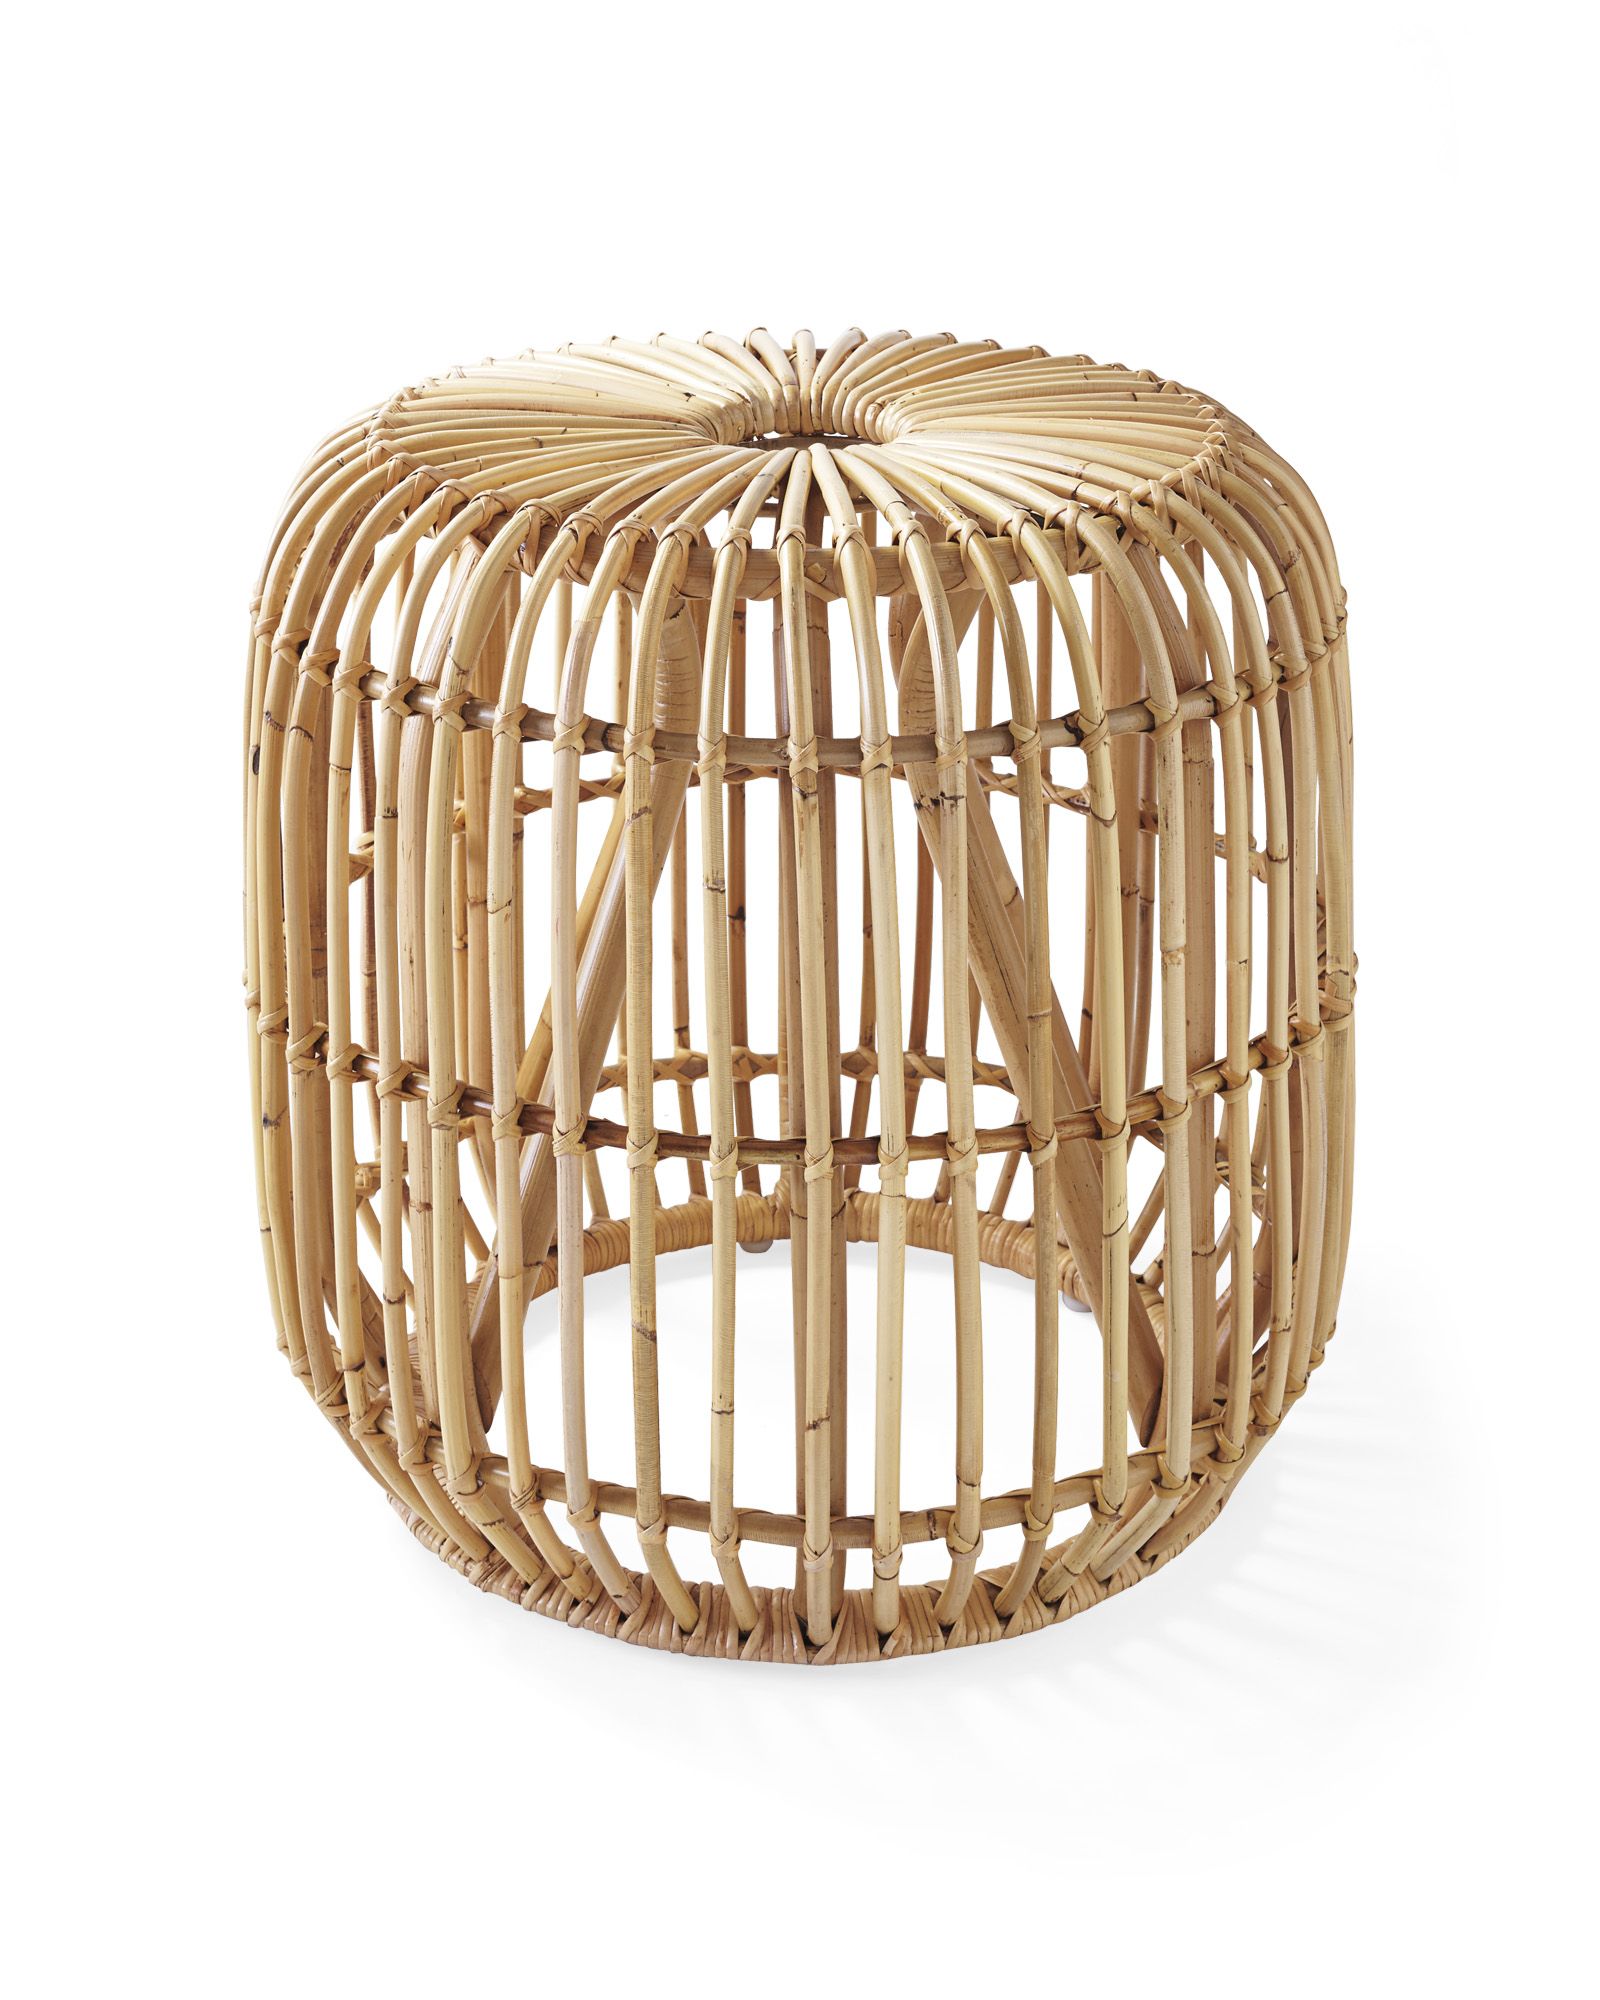 Pismo Rattan Side Table | Serena and Lily